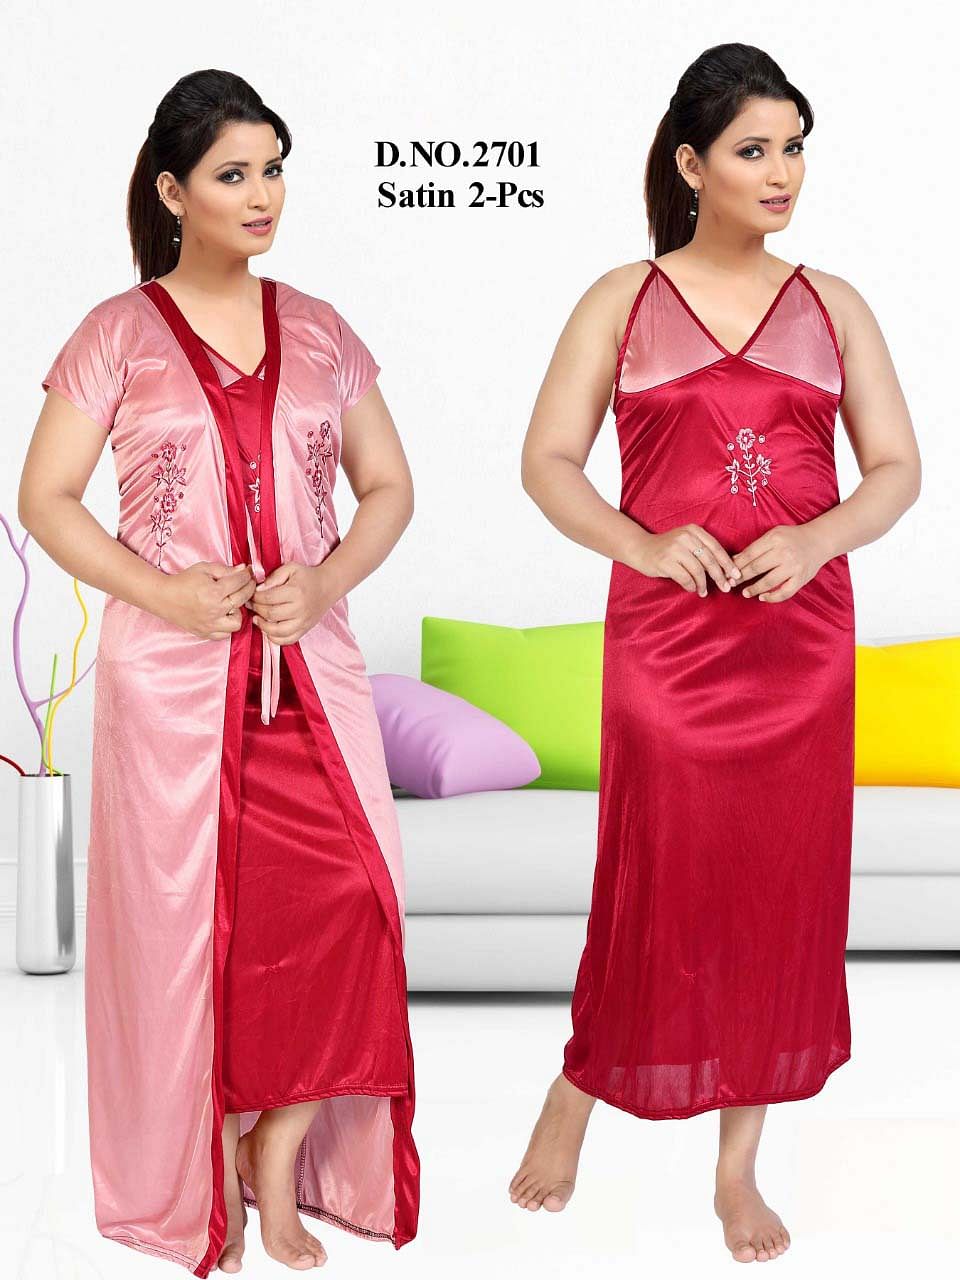 SATIN TWO PIECE NIGTHY-MAHROON-KC JUNE 2701